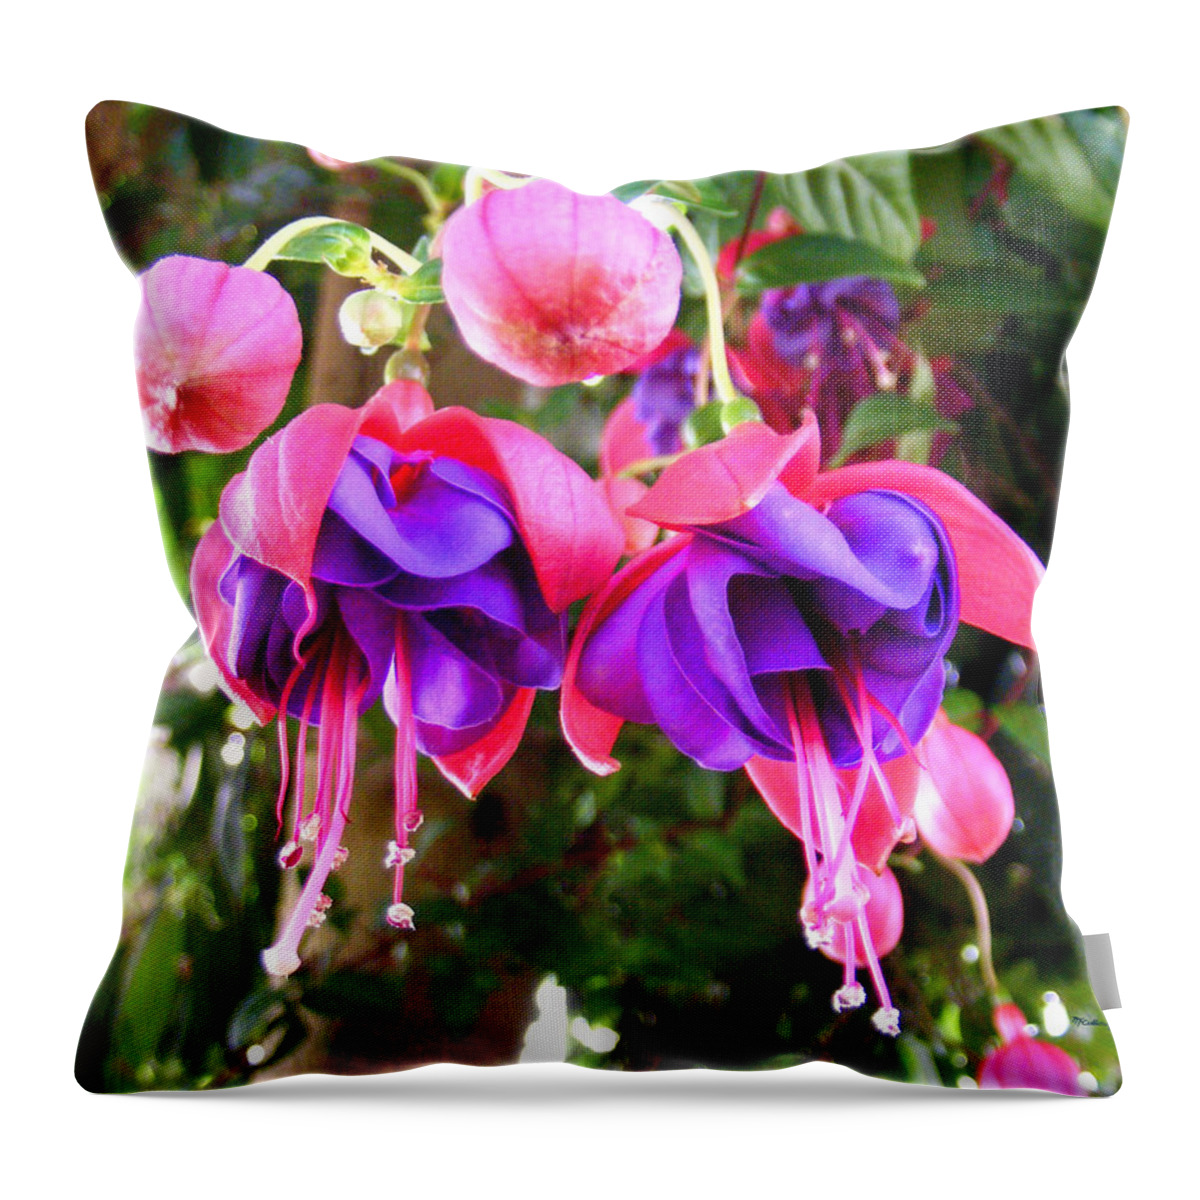 Plants Throw Pillow featuring the photograph Fushia Flowers 2 by Duane McCullough